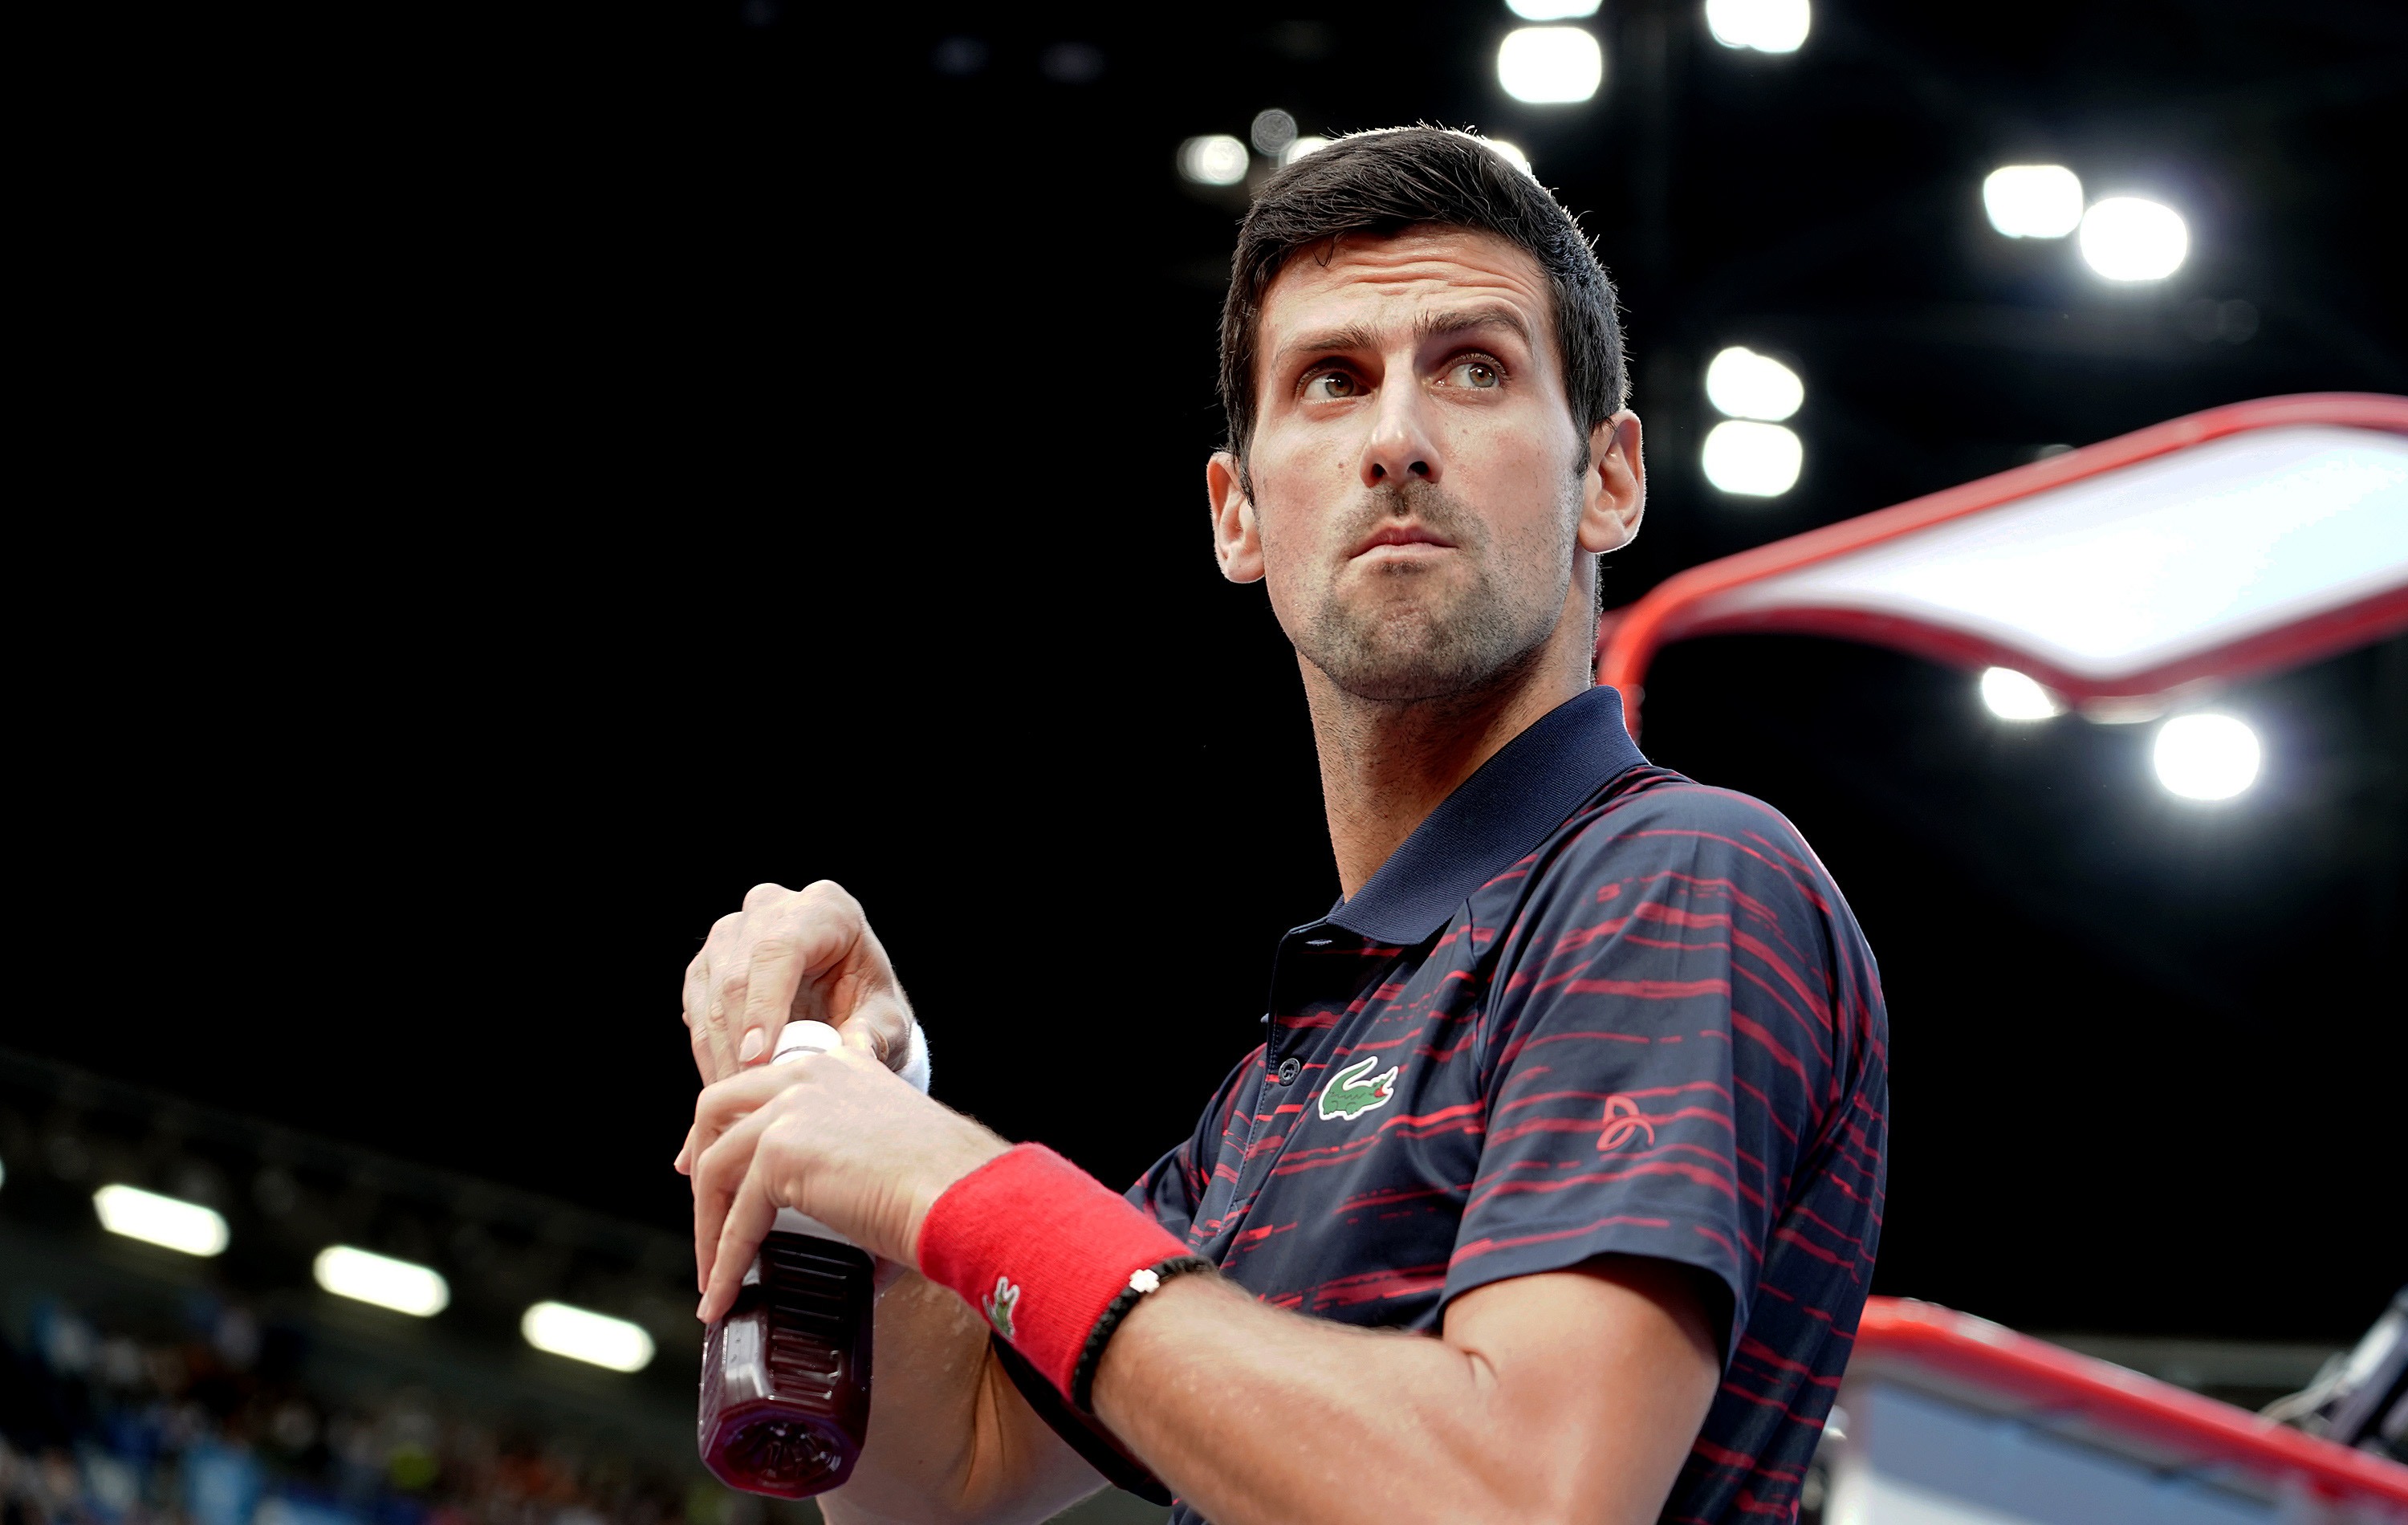 Djokovic backs idea of turning "polluted water into the most healing